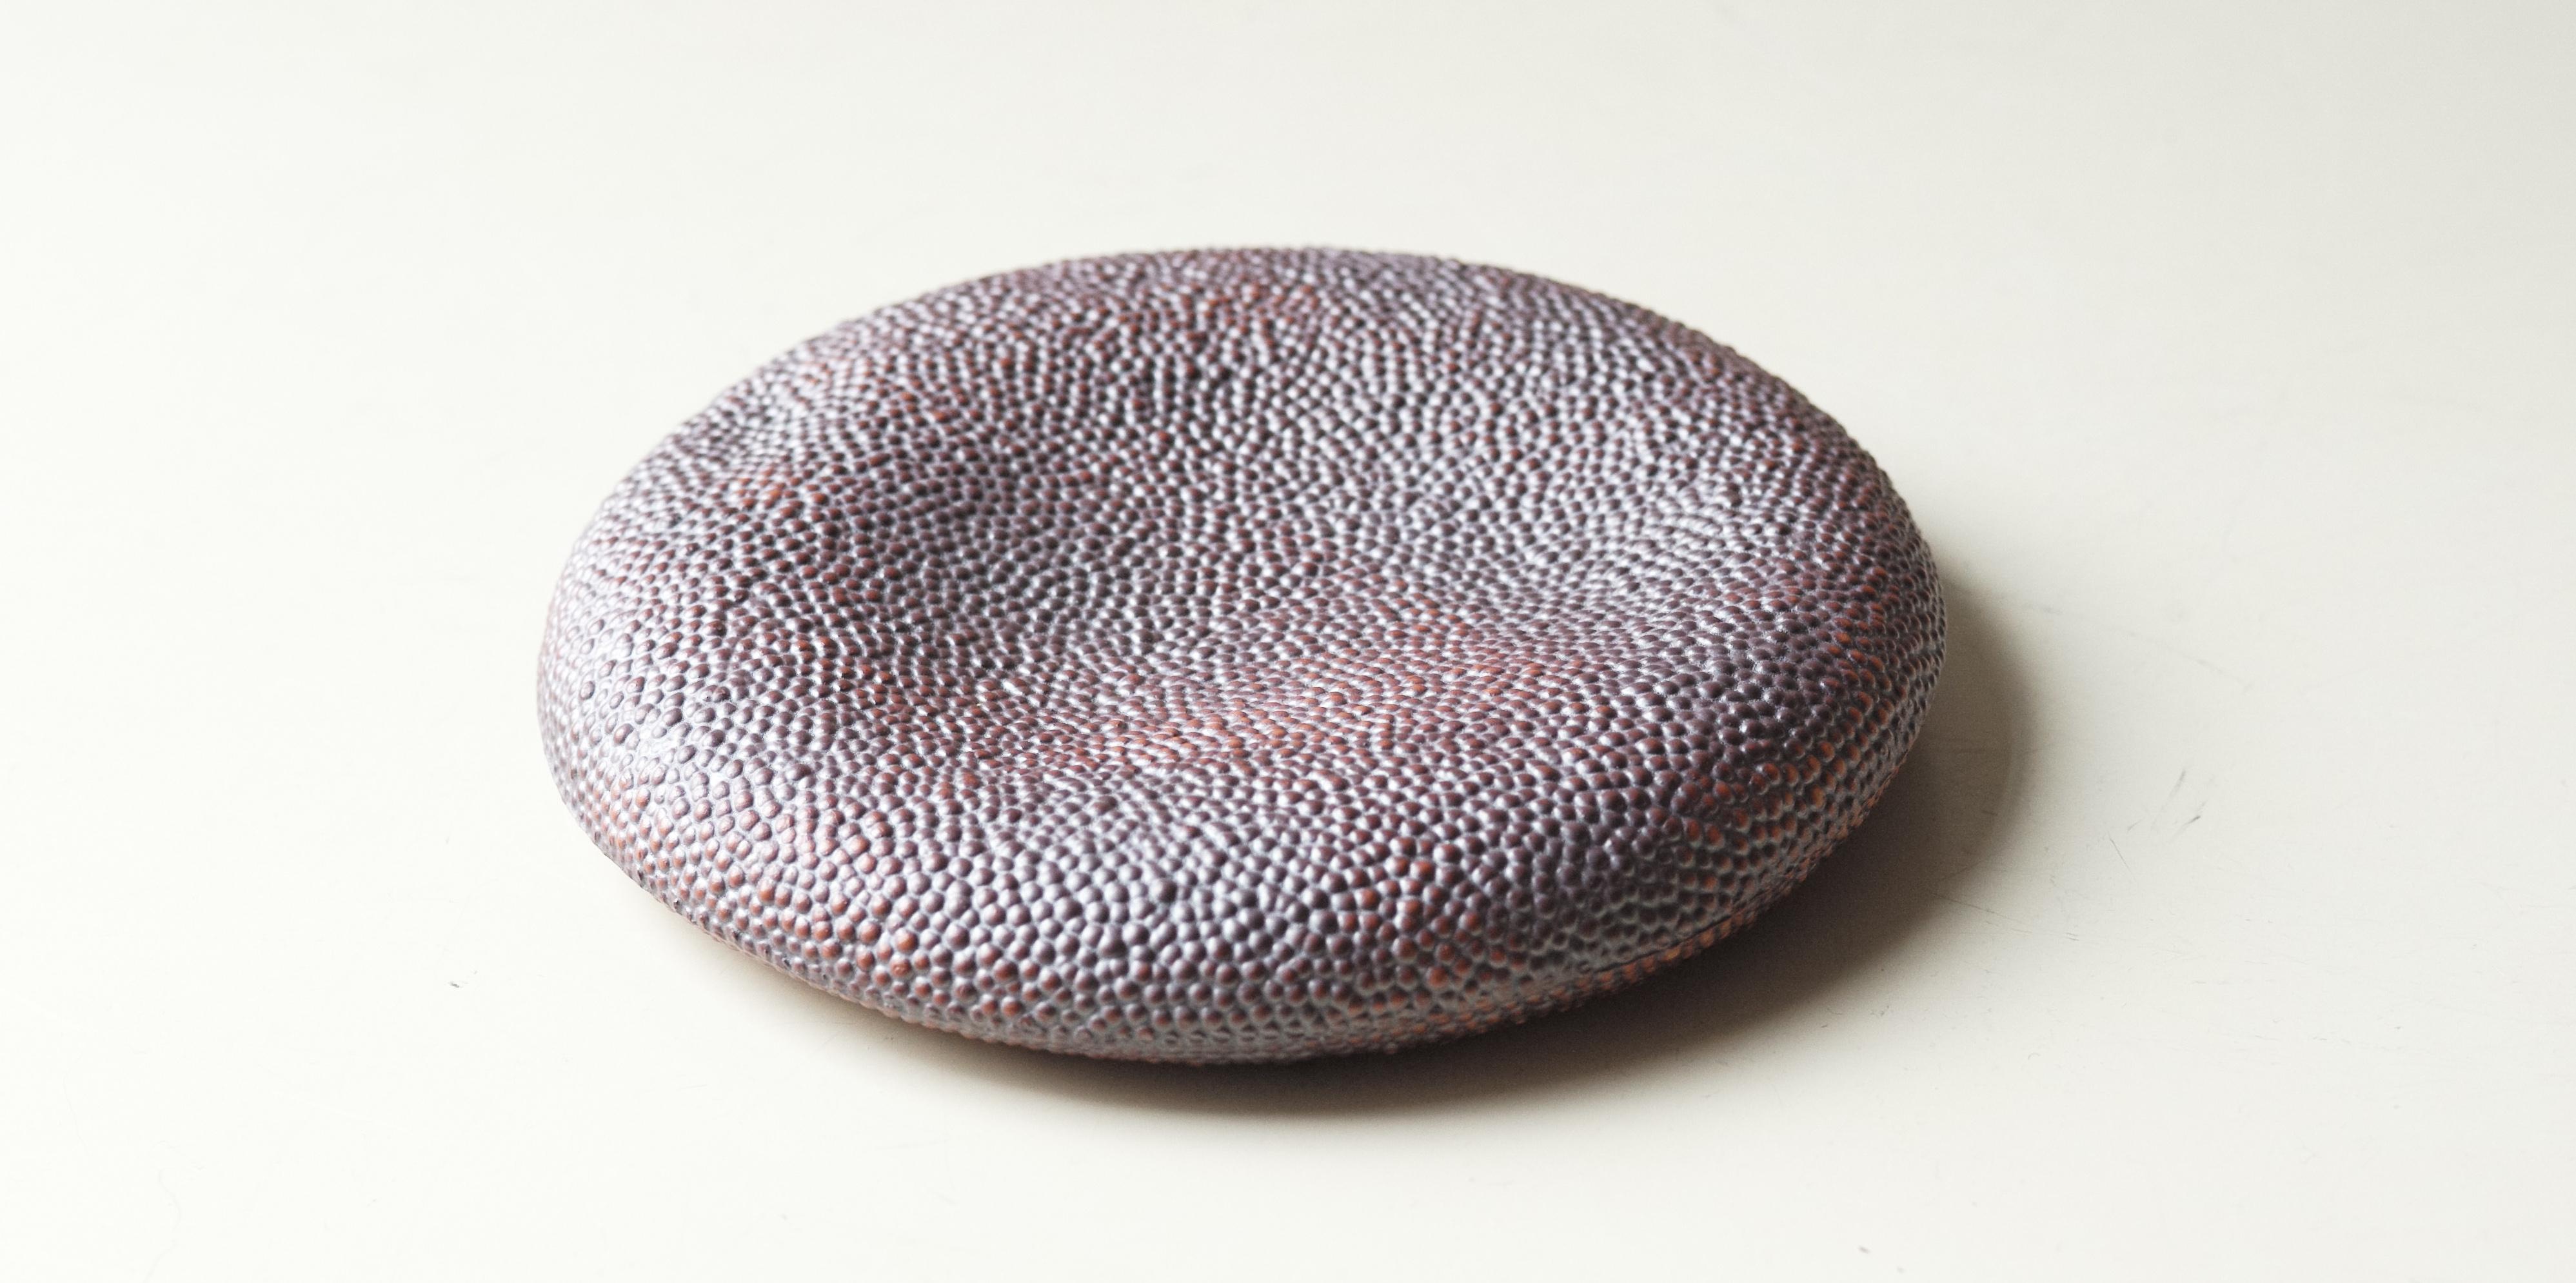 Unique piece created by artist Lana Kova. Slip casted porcelain with micro texture of tiny bumps that Lana calls Caviar series. Gas fired. Iridescent purple glaze with dry surface feel. Made in NYC.